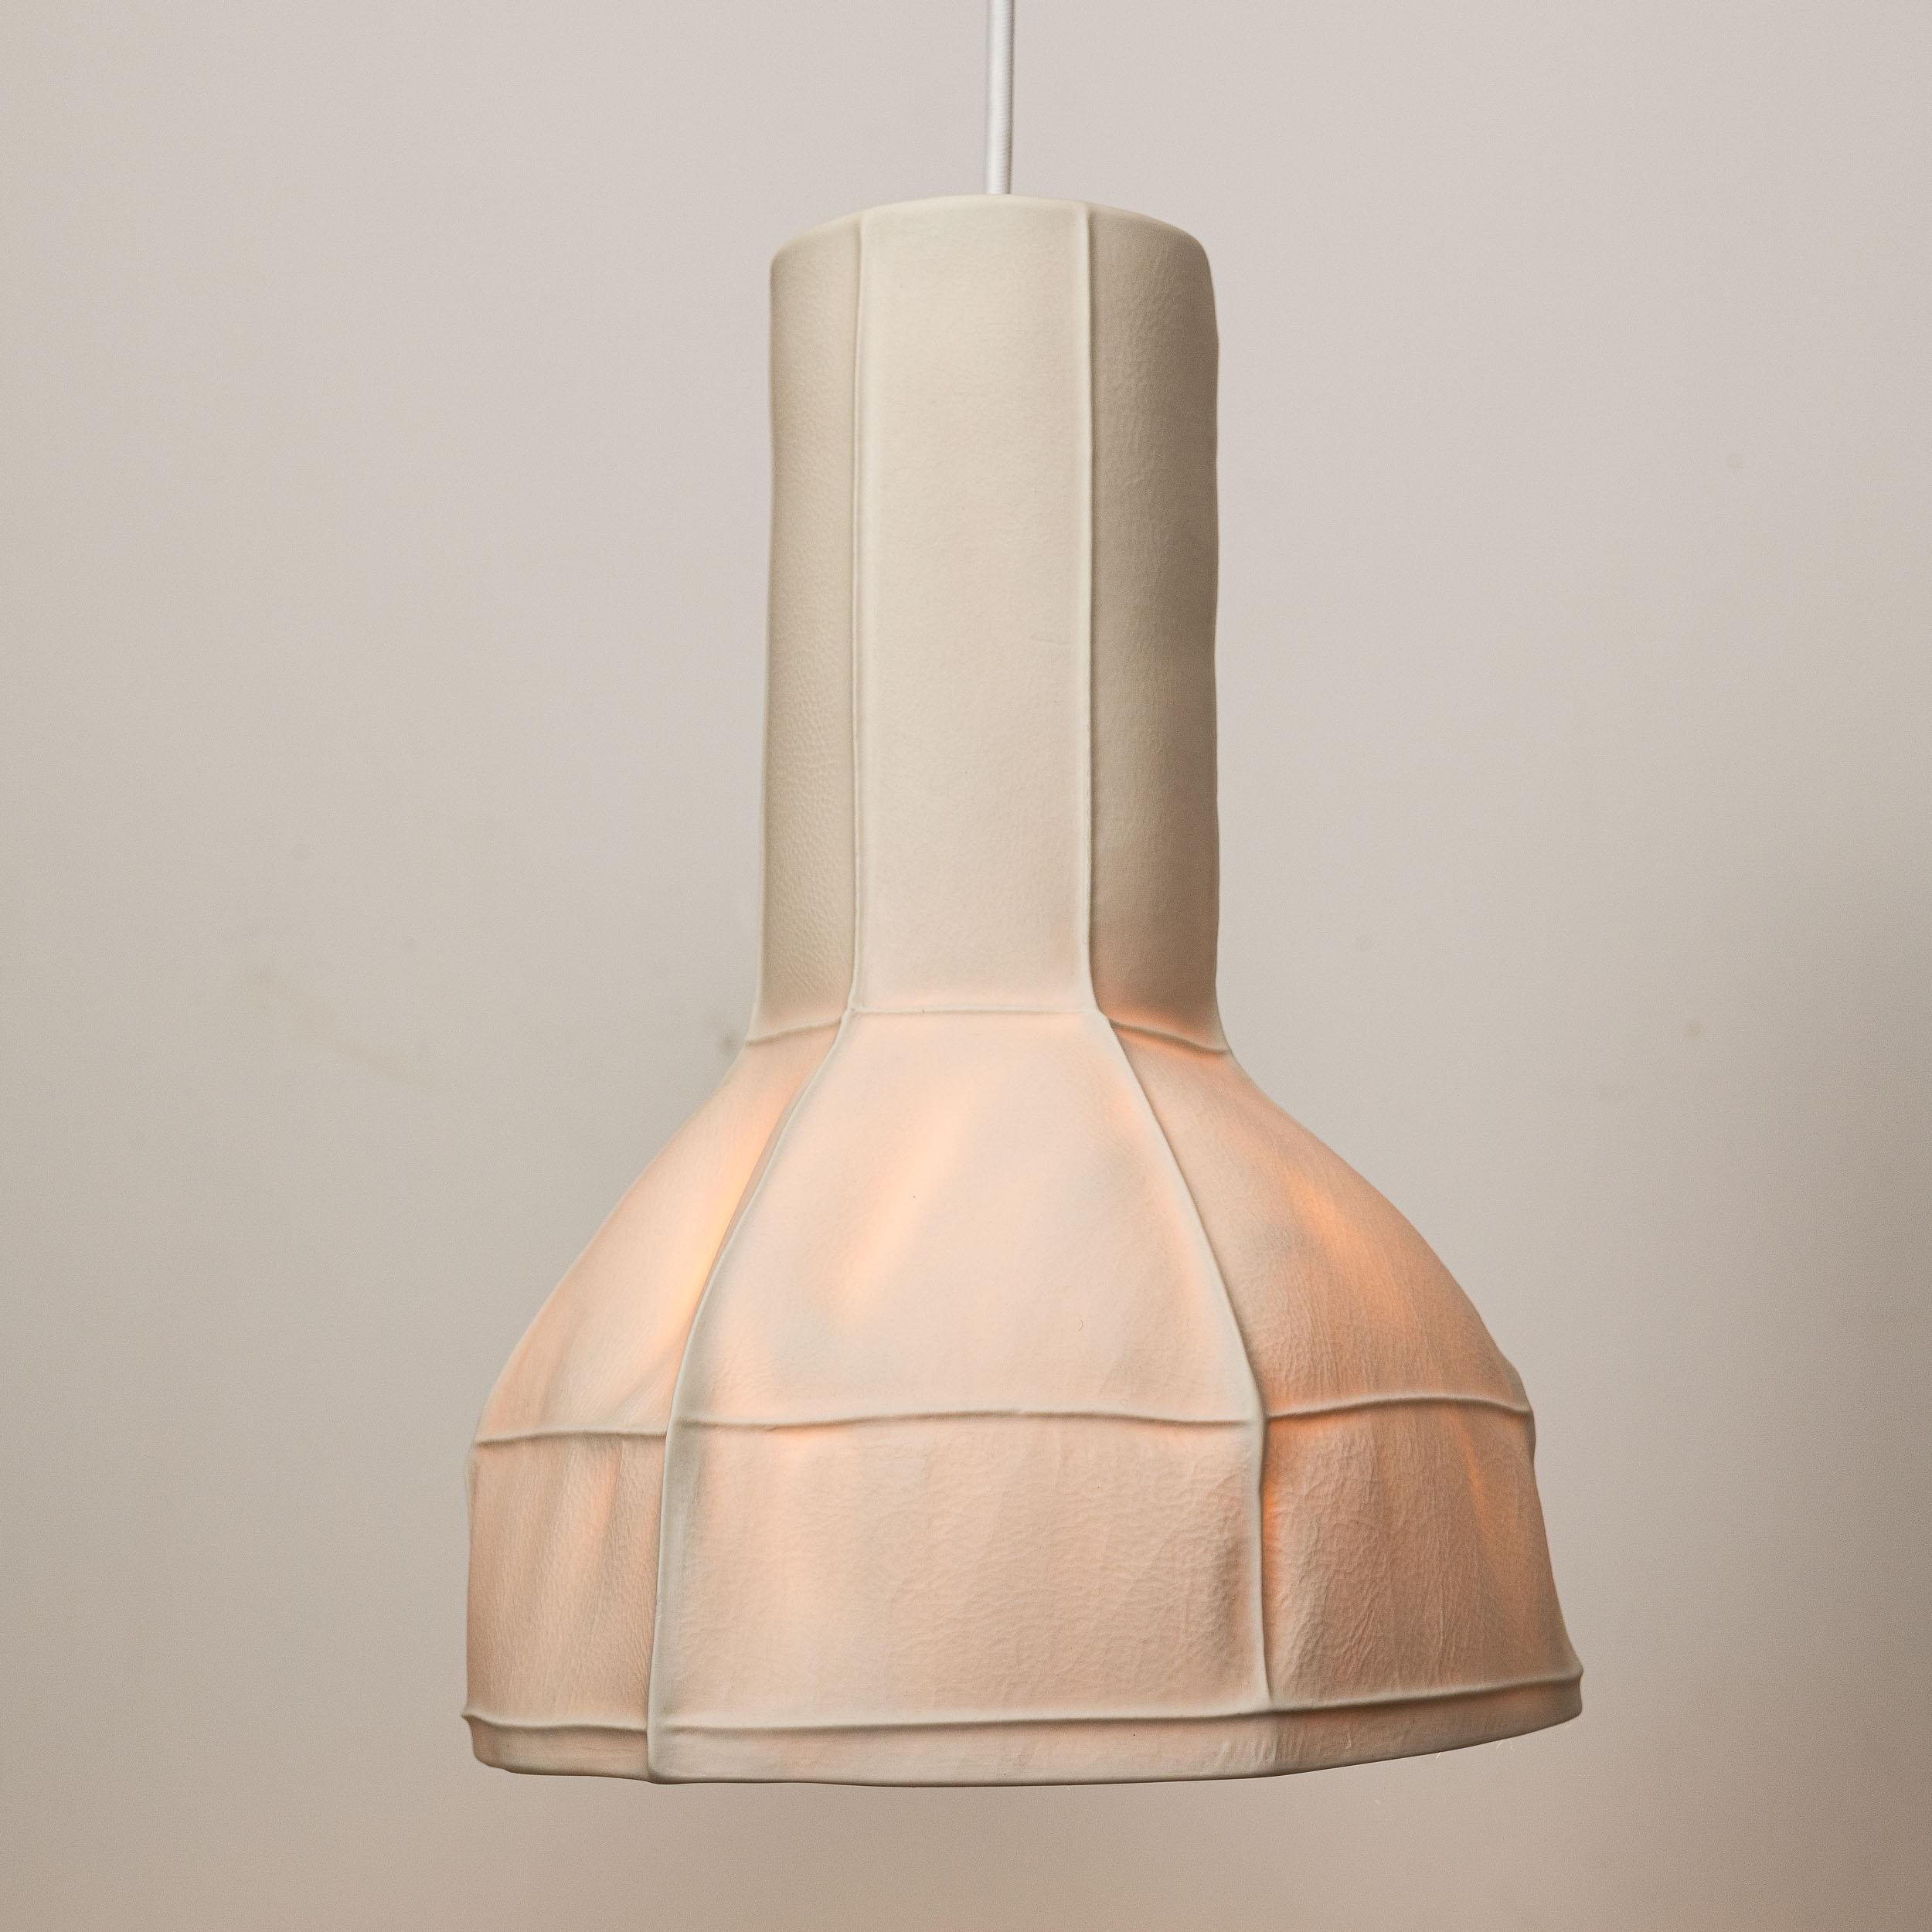 Kawa Series Light 05, White Organic Modern Porcelain Pendant Lamp, Leather Cast In New Condition For Sale In Brooklyn, NY